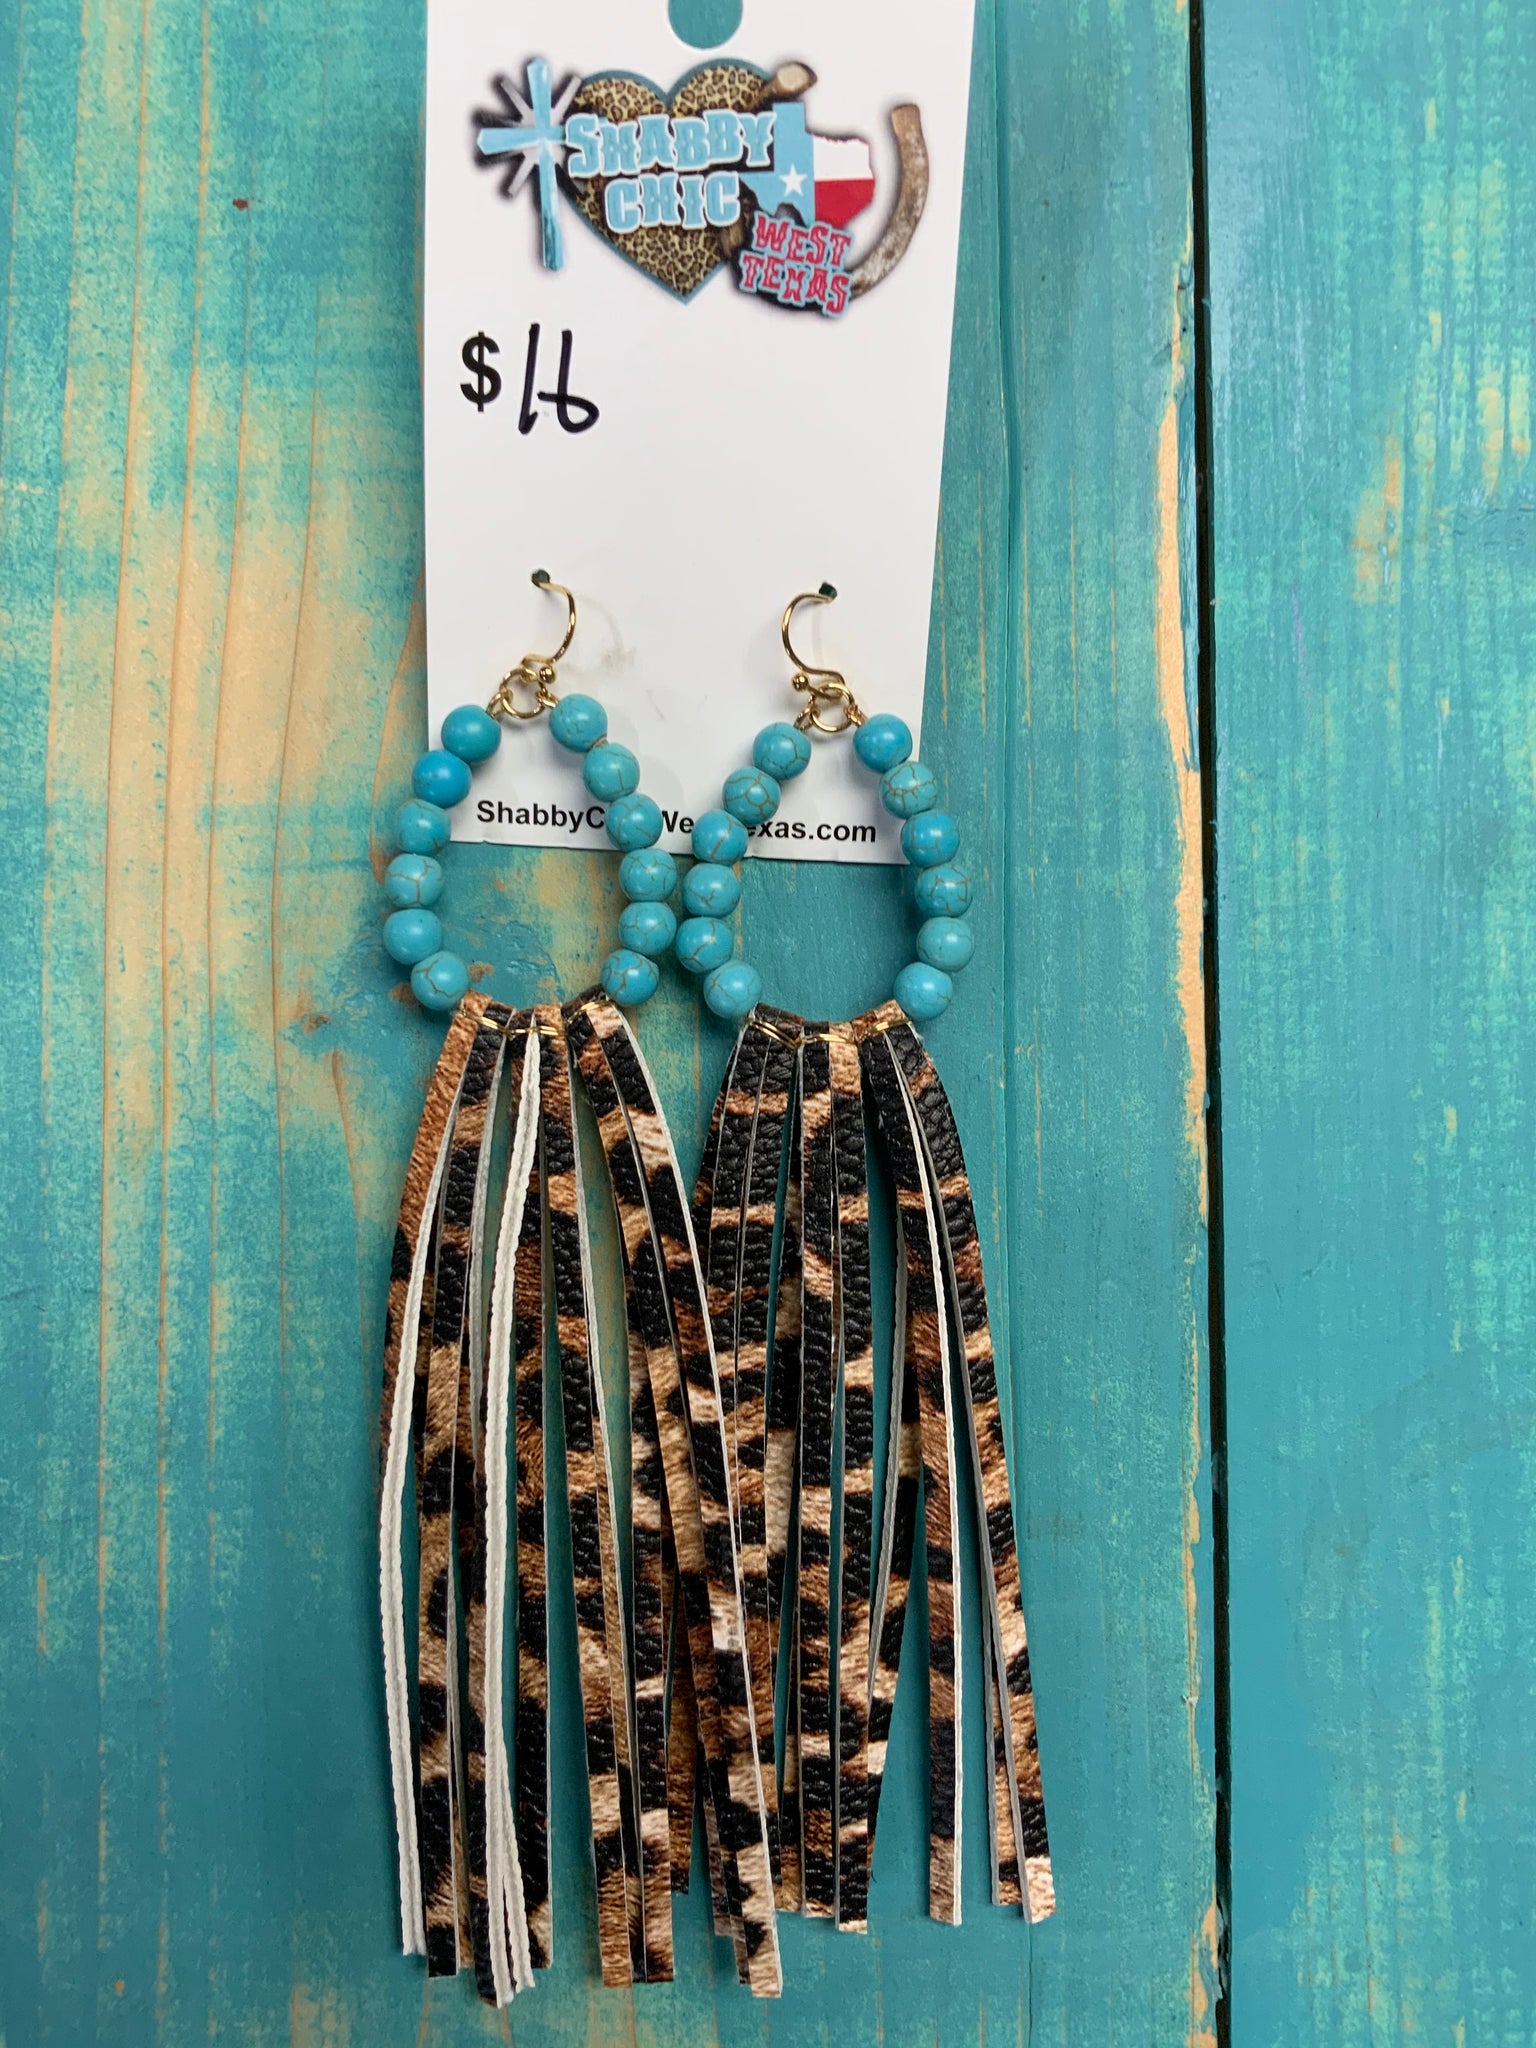 Cheekys small oval turquoise beads with Leopard Fringe Earrings